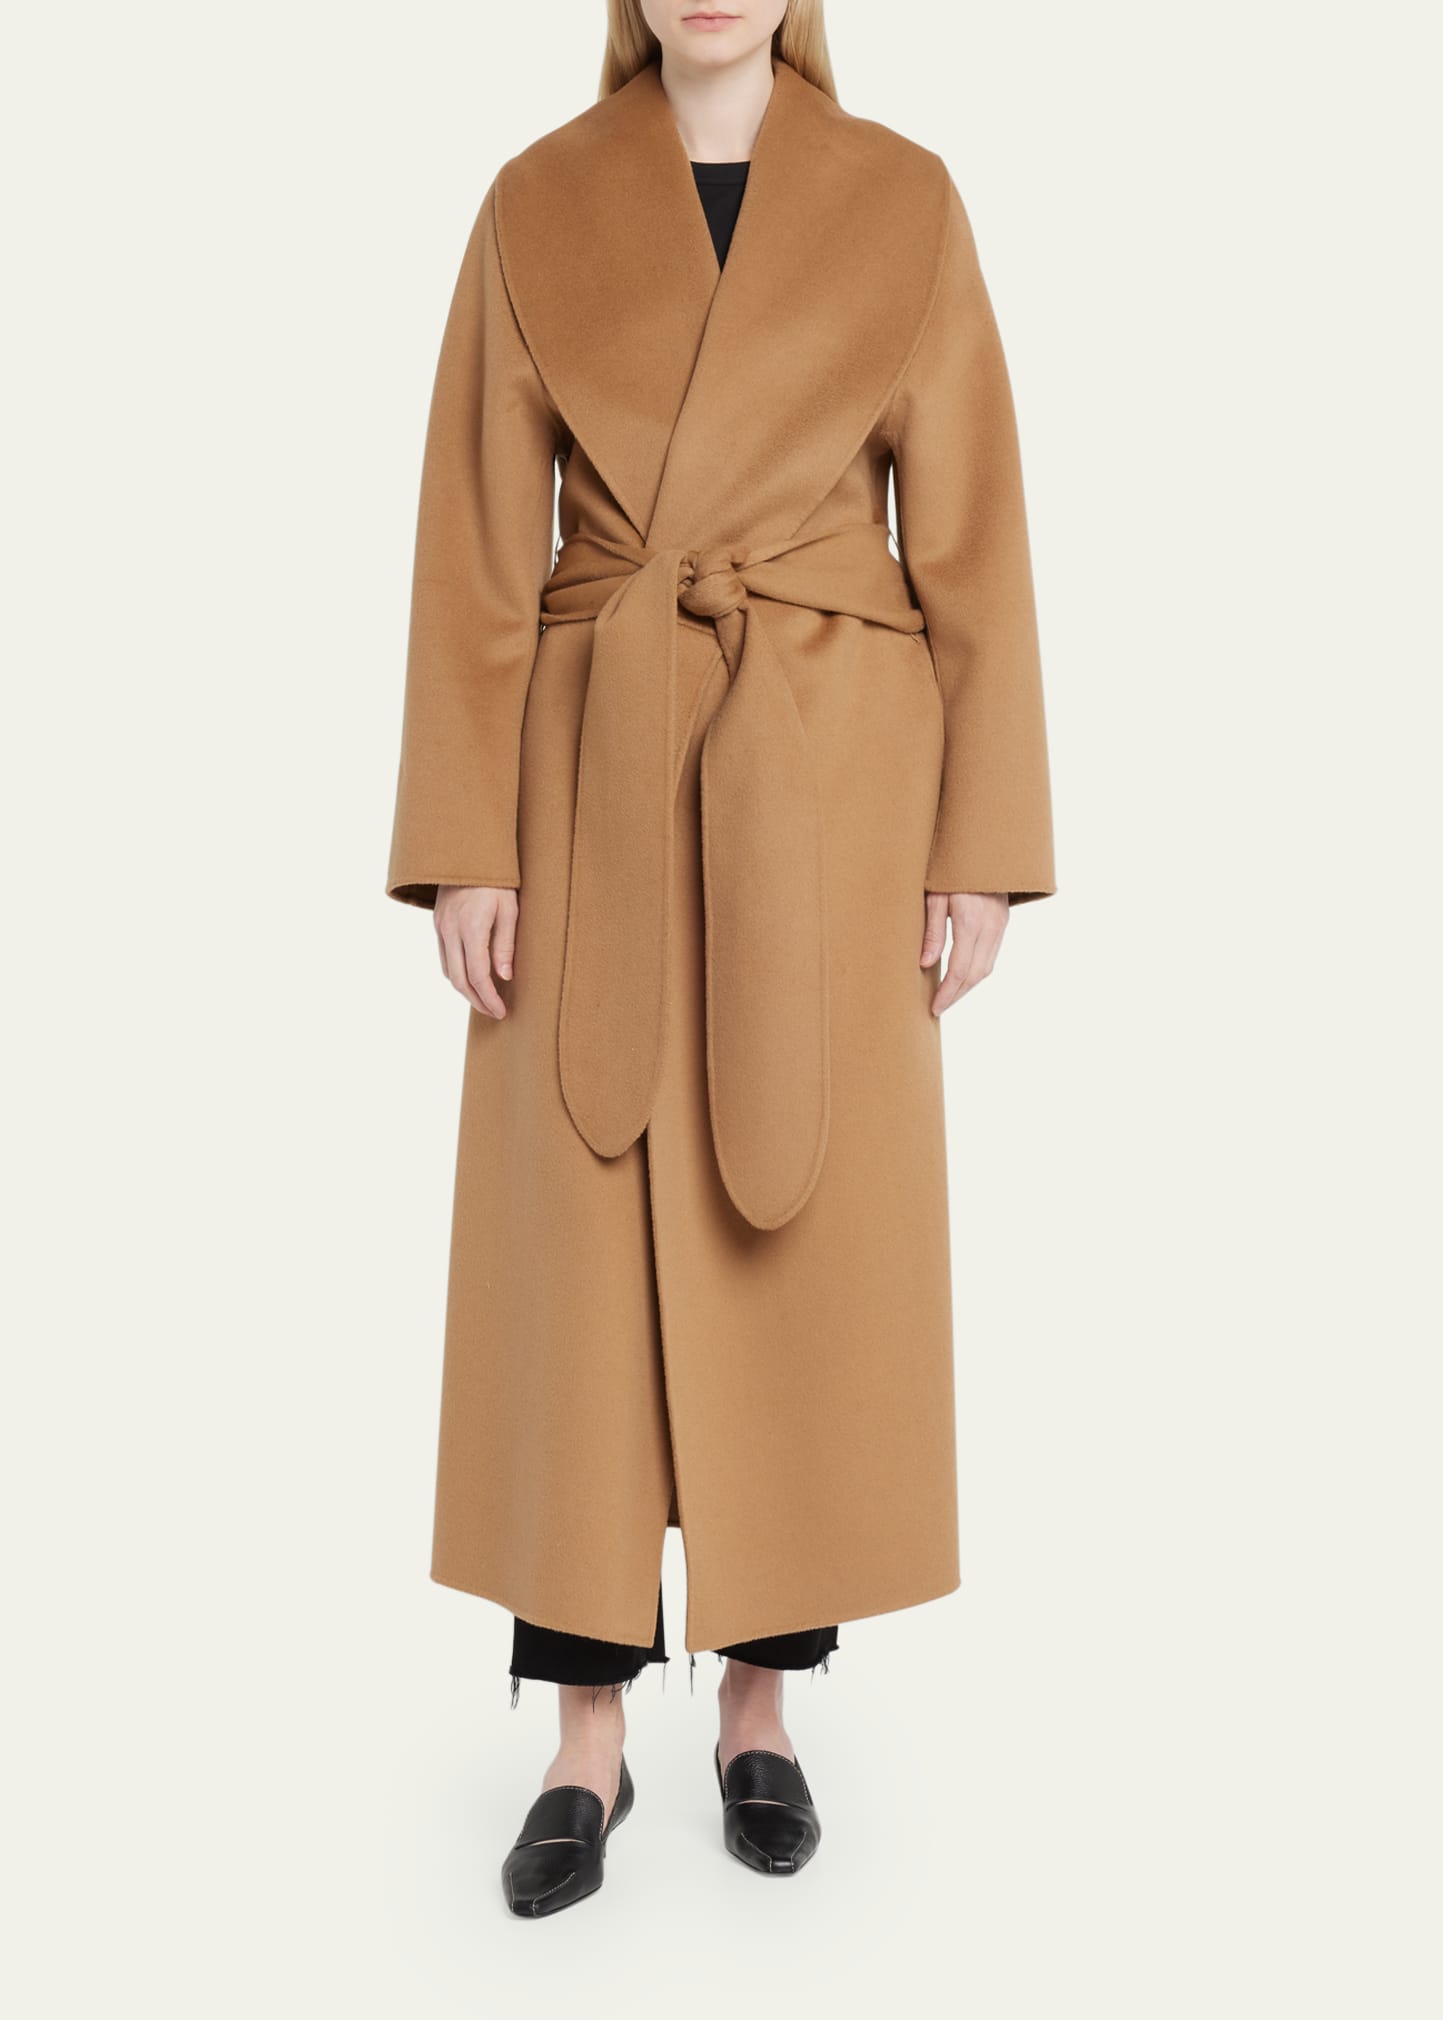 Toteme Belted Long Wool Robe Coat